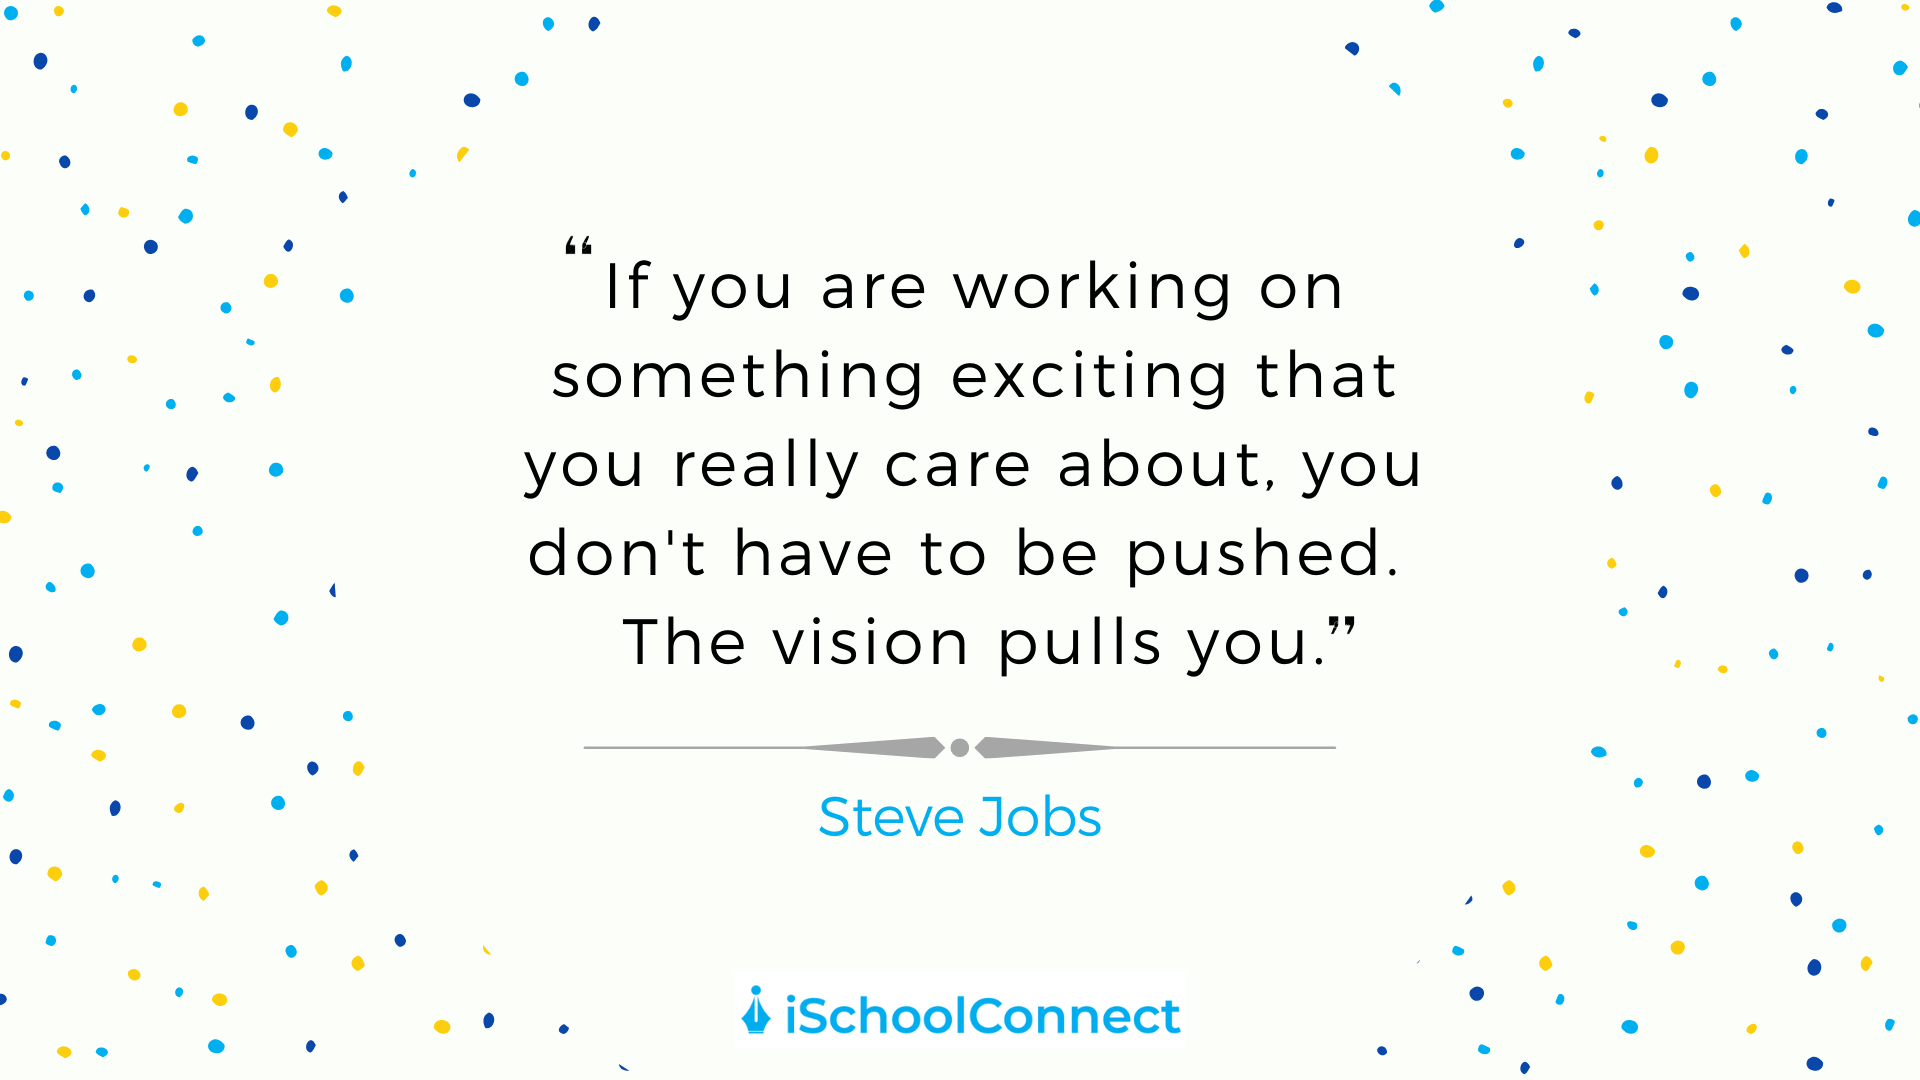 If you are working on something exciting that you really care about, you don't have to be pushed. The vision pulls you. -Steve Jobs